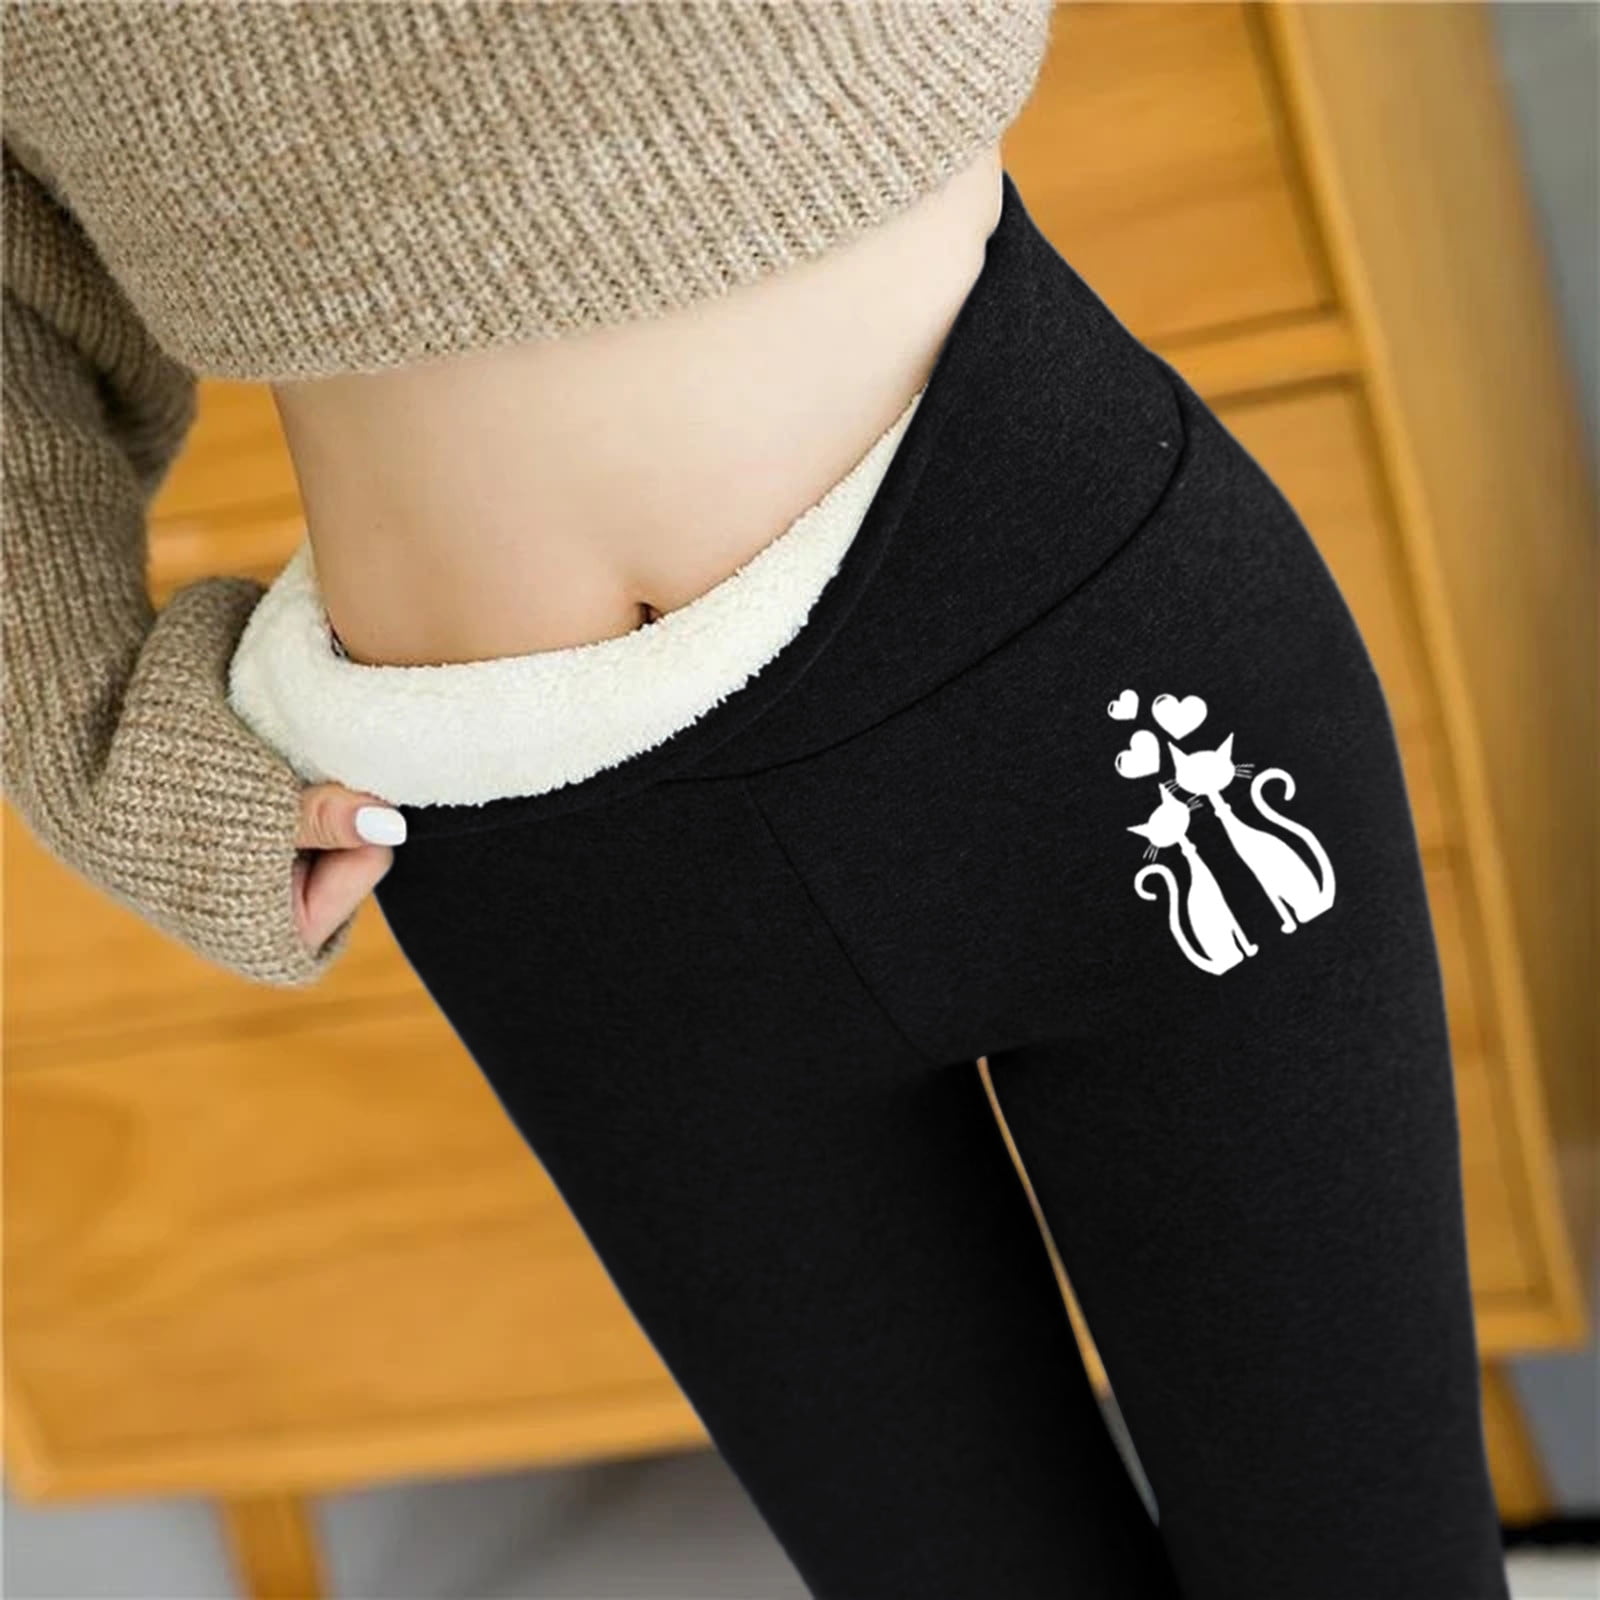 Fashion Step Pants Women Stretchy Yoga Pants Slim Seamless Leggings Fleece  Lined Thicken Tights Winter Warm Pants Leggin Color Black Ships From United  States